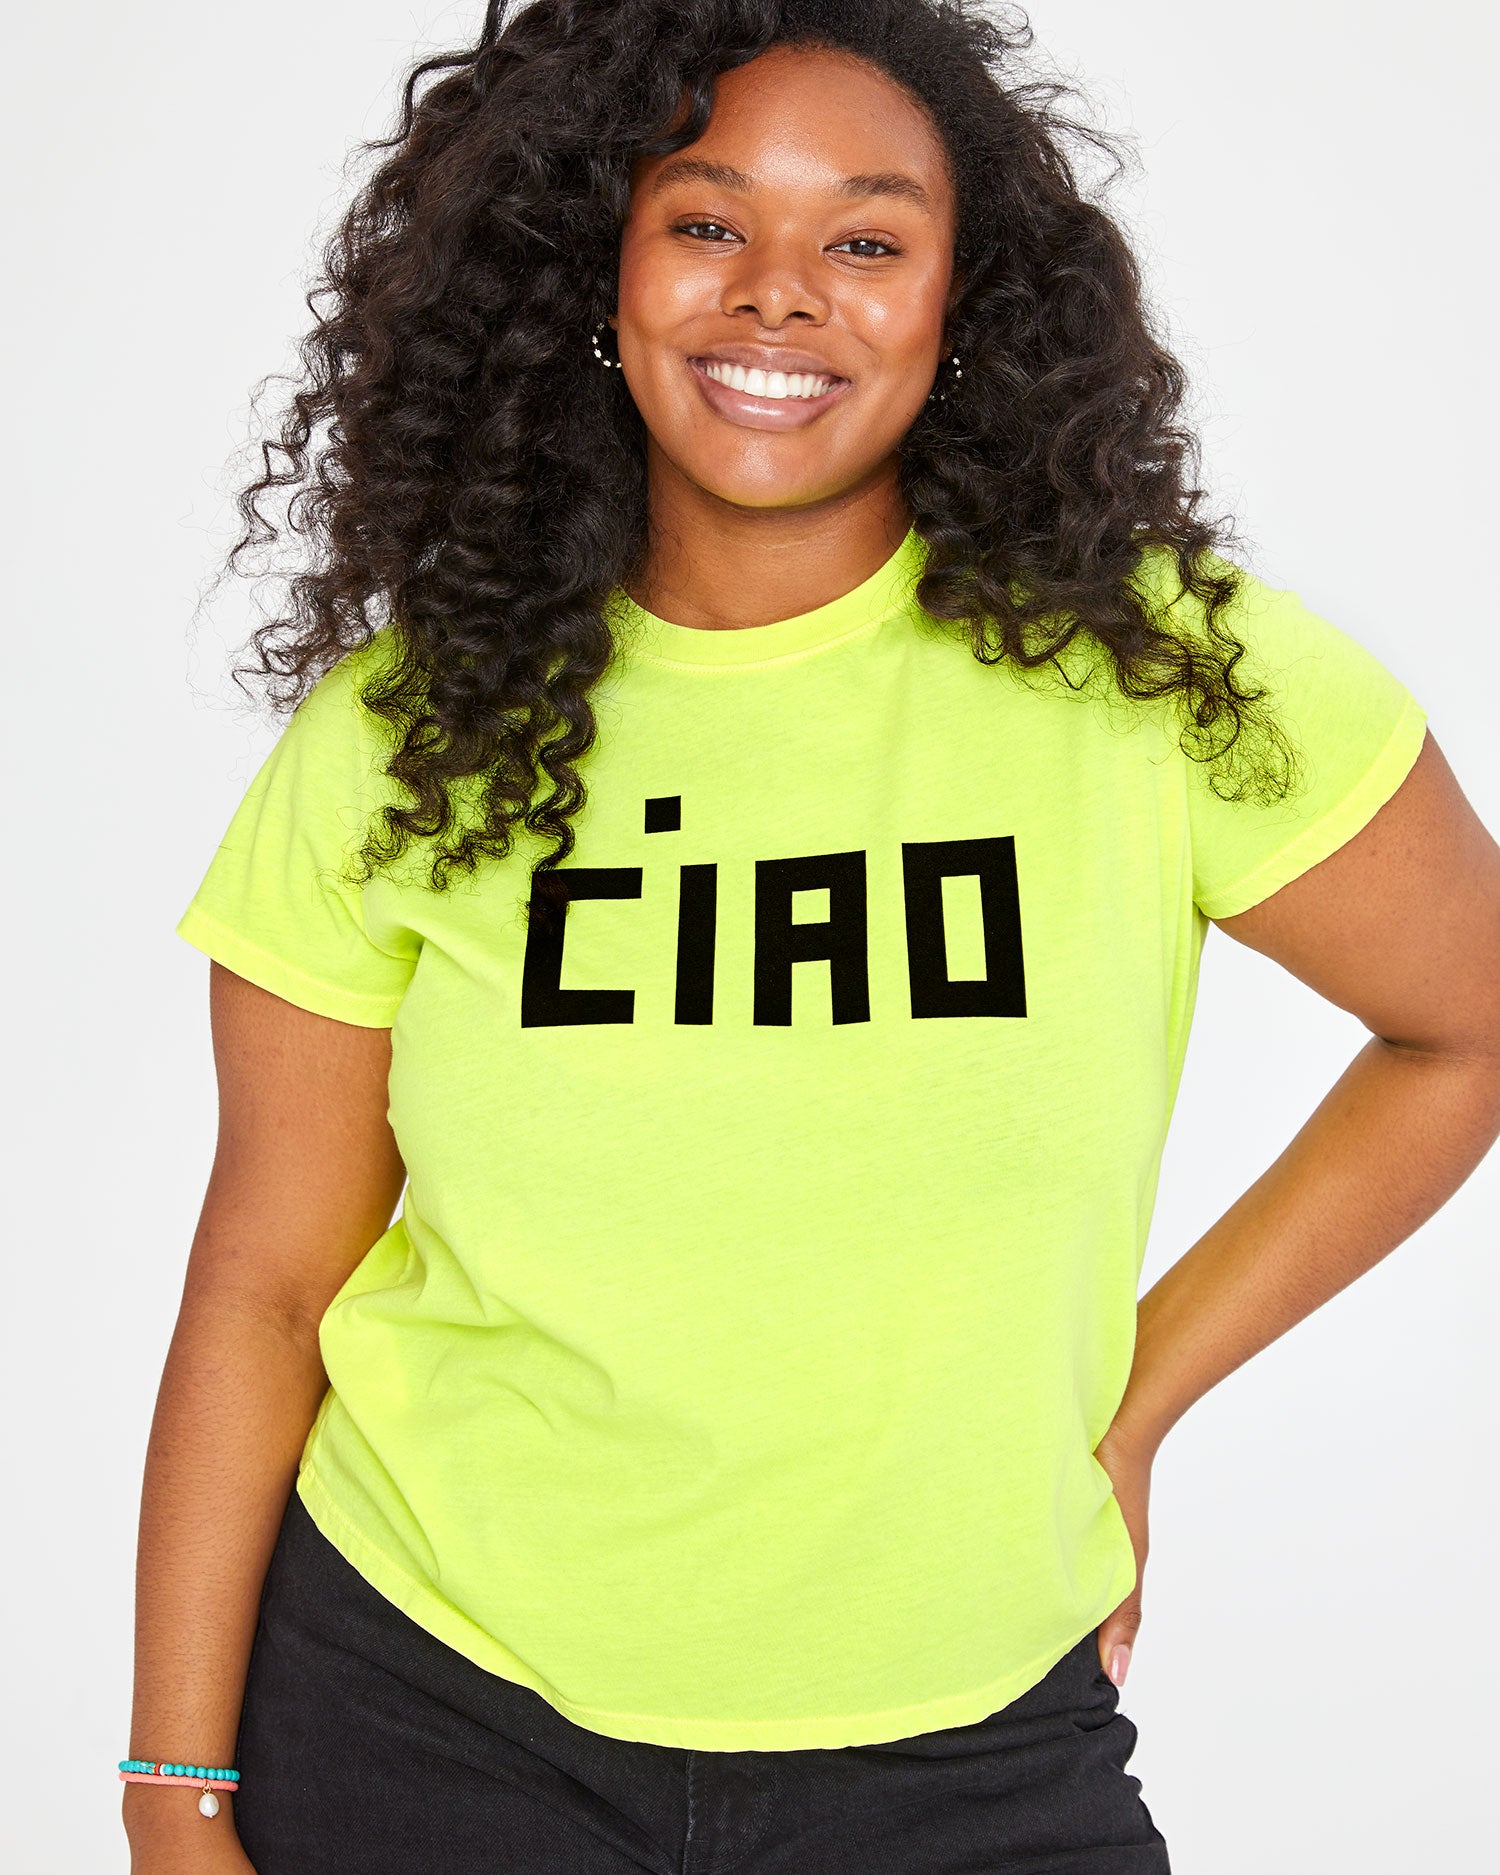 Candice wearing the Neon Yellow w/ Ciao Classic Tee